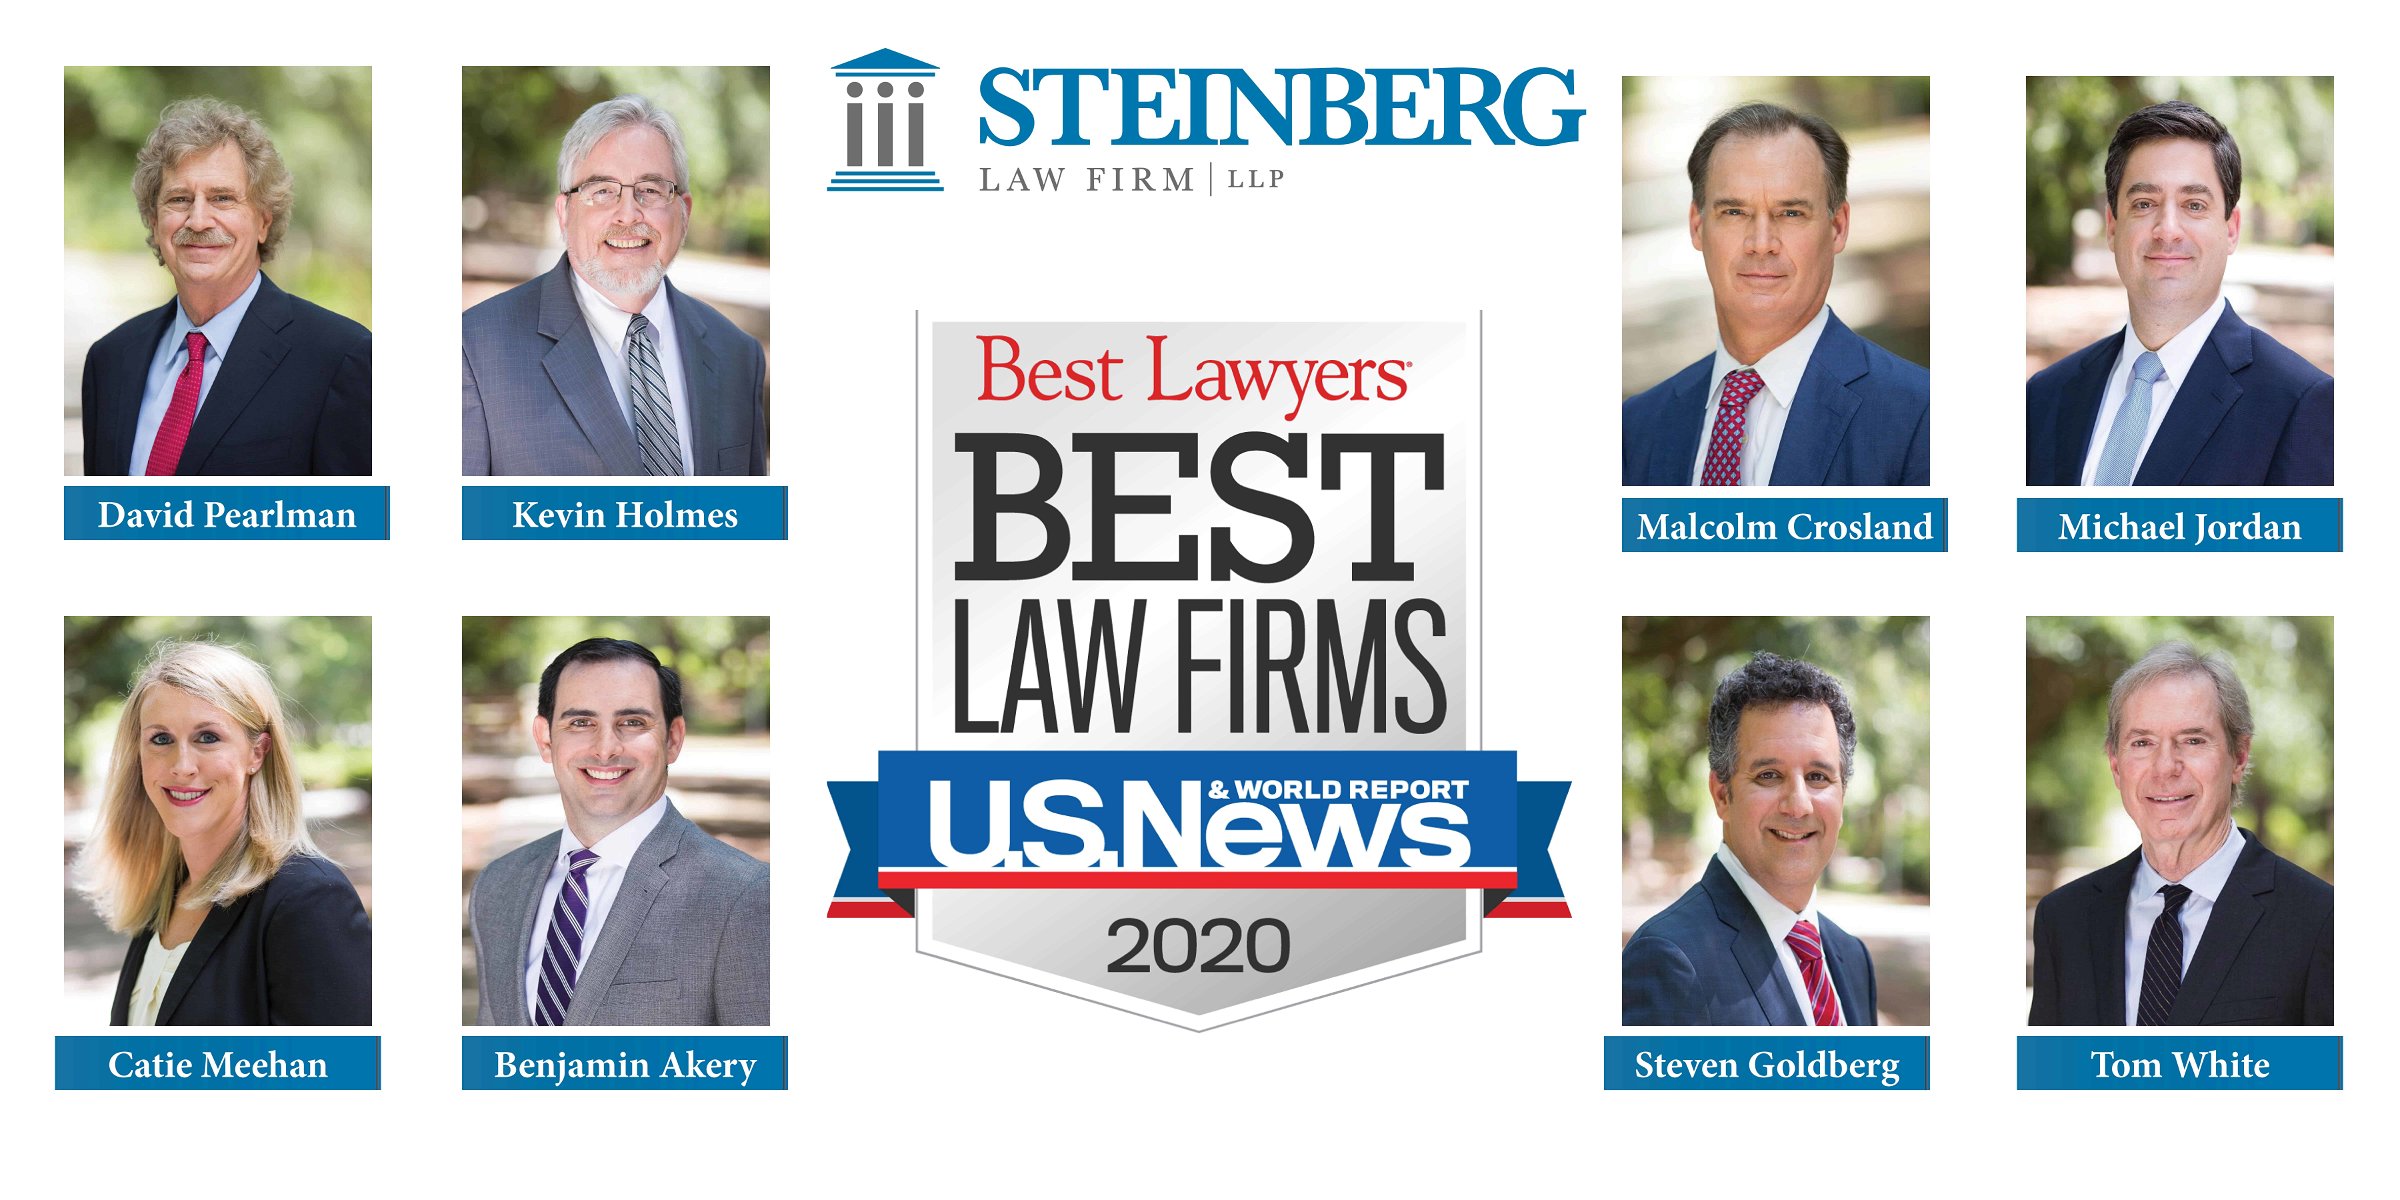 Eight Steinberg Law Workers’ Compensation and Personal Injury Attorneys Named in 2020 Edition of “The Best Lawyers in America”